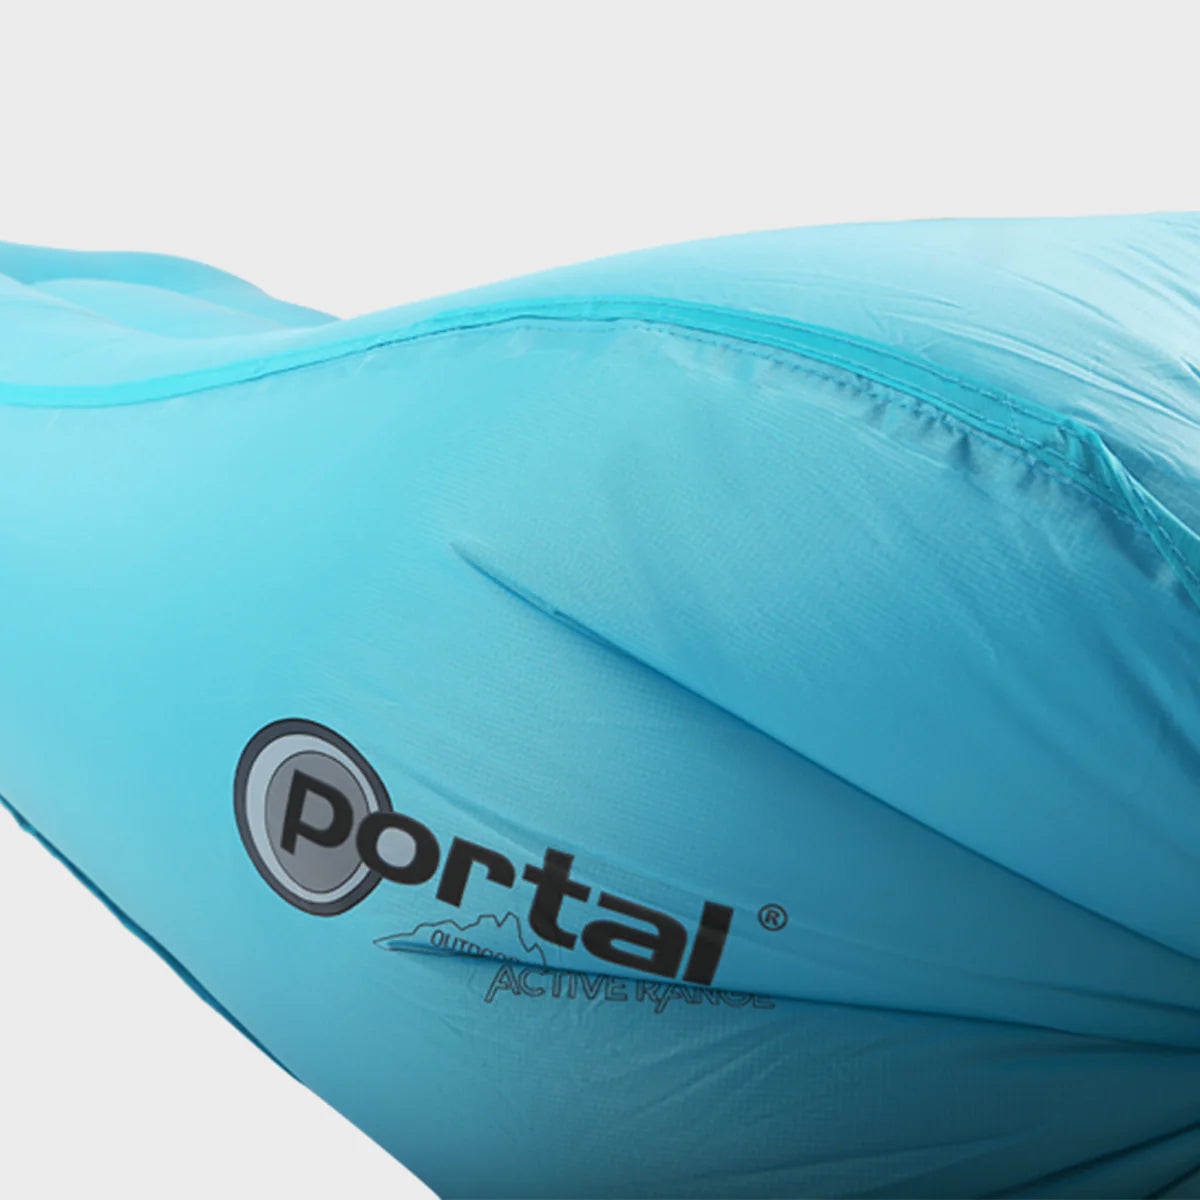 Portal Outdoor - Inflatable Camping Lounger - Jersey